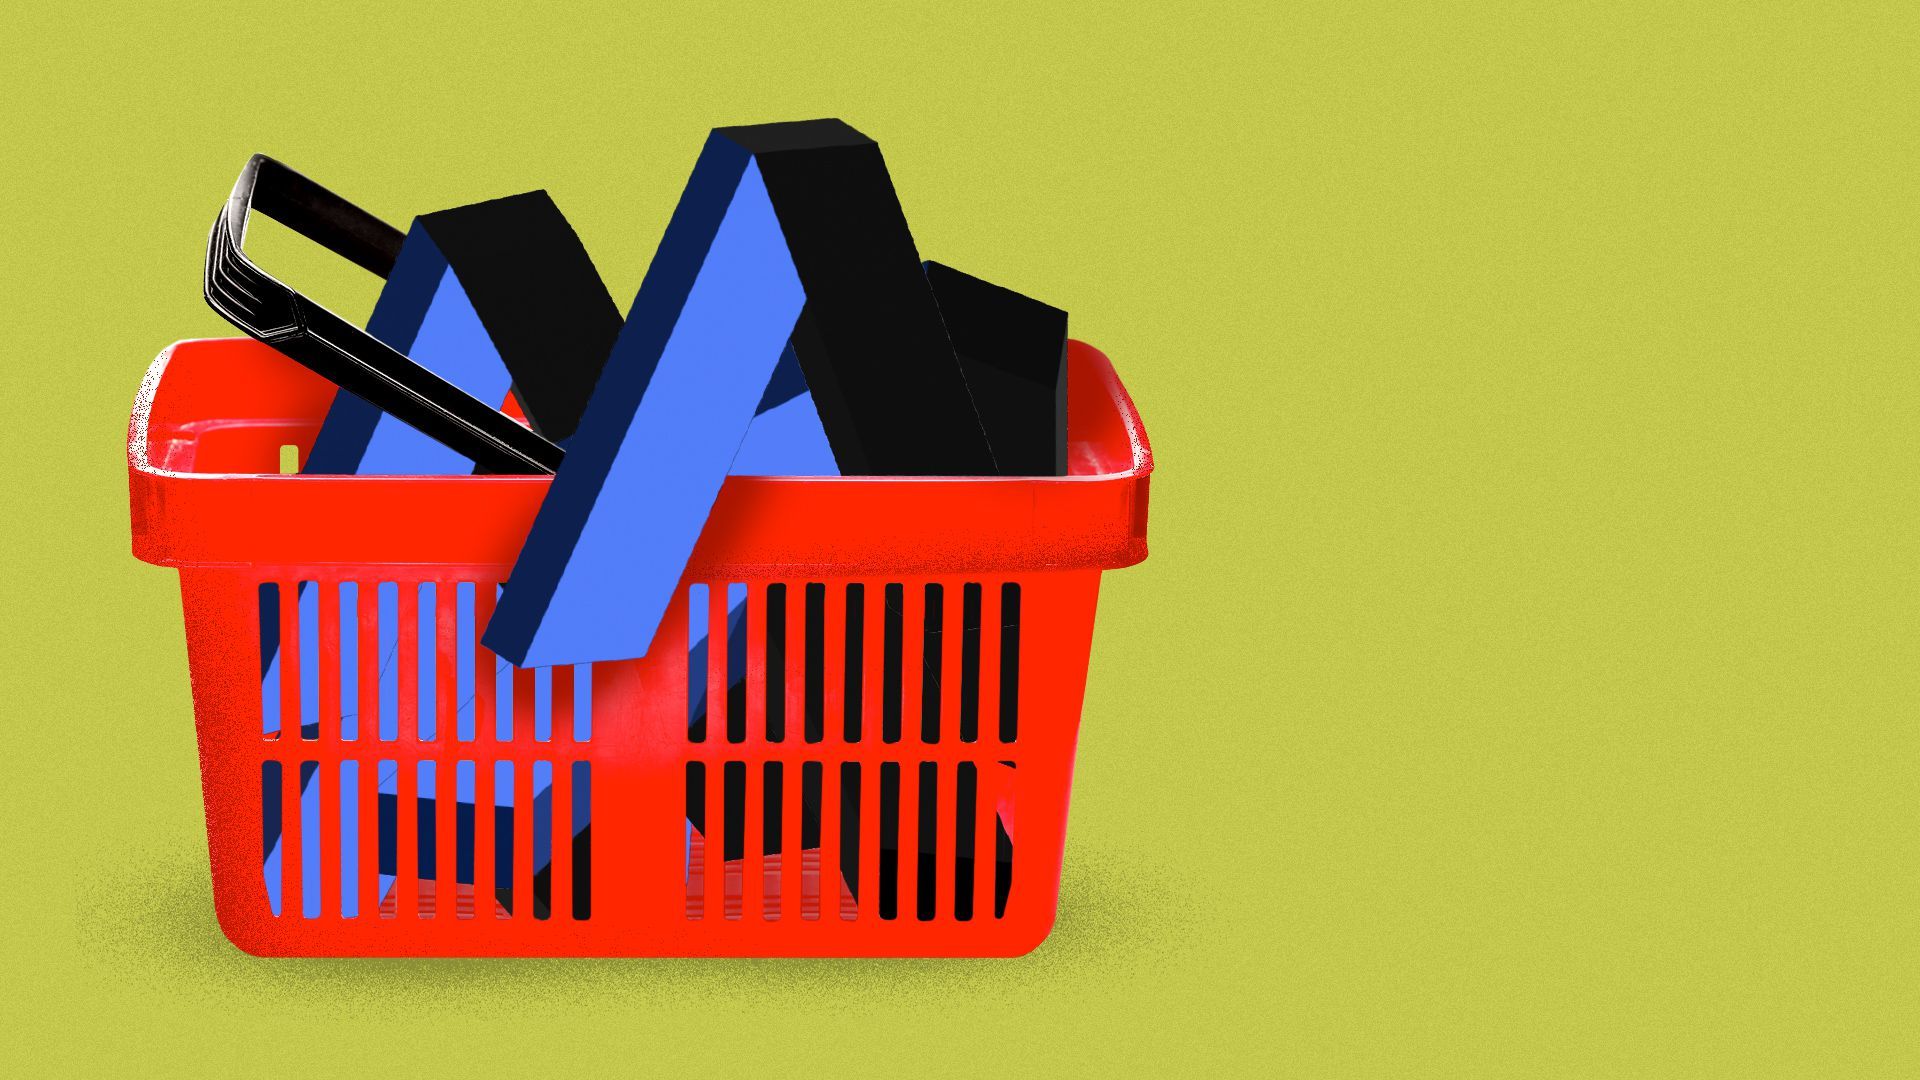 Illustration of Axios logo A's in a shopping basket. 